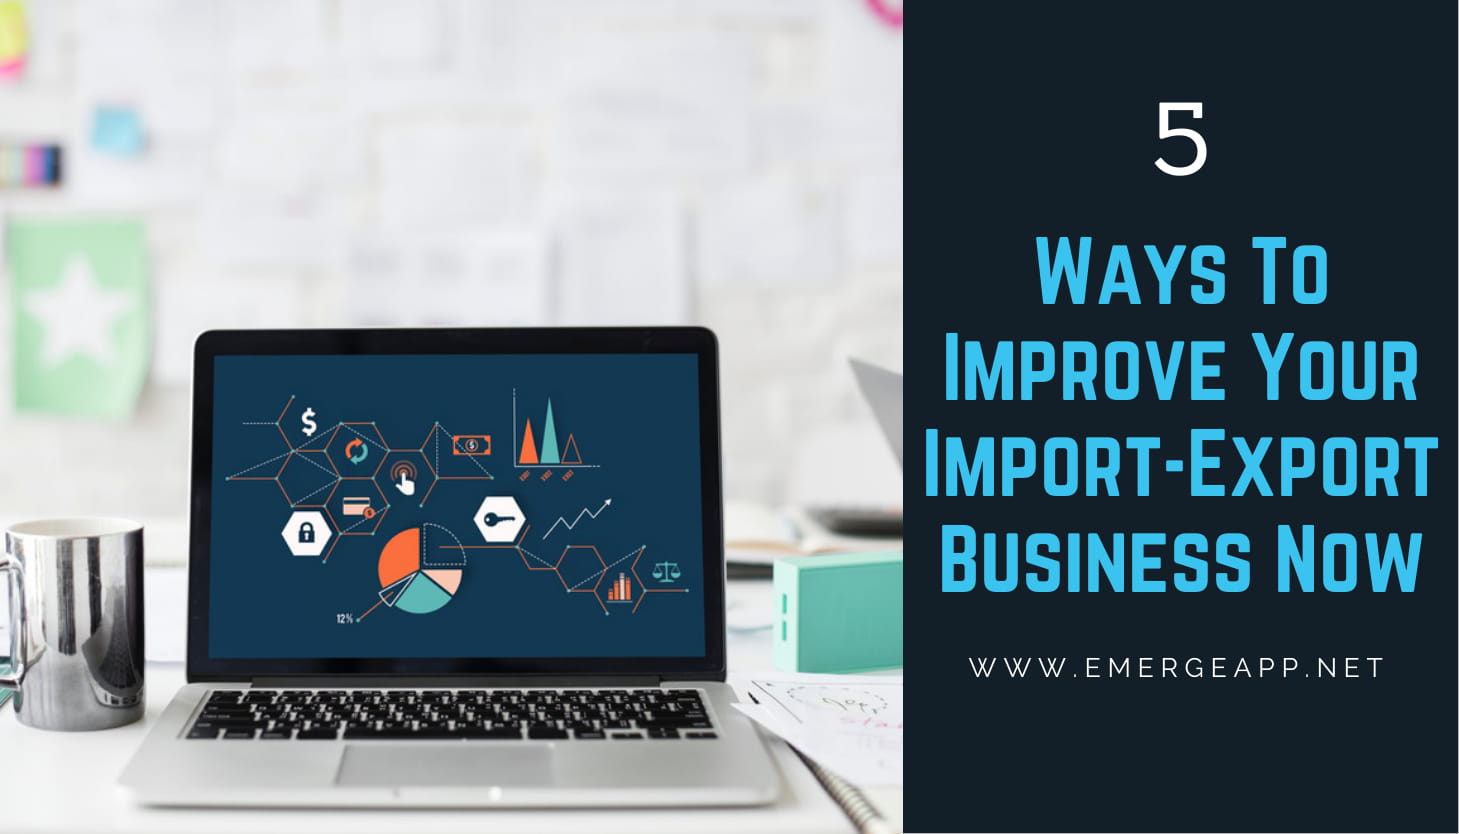 Improve Your Import-Export Business